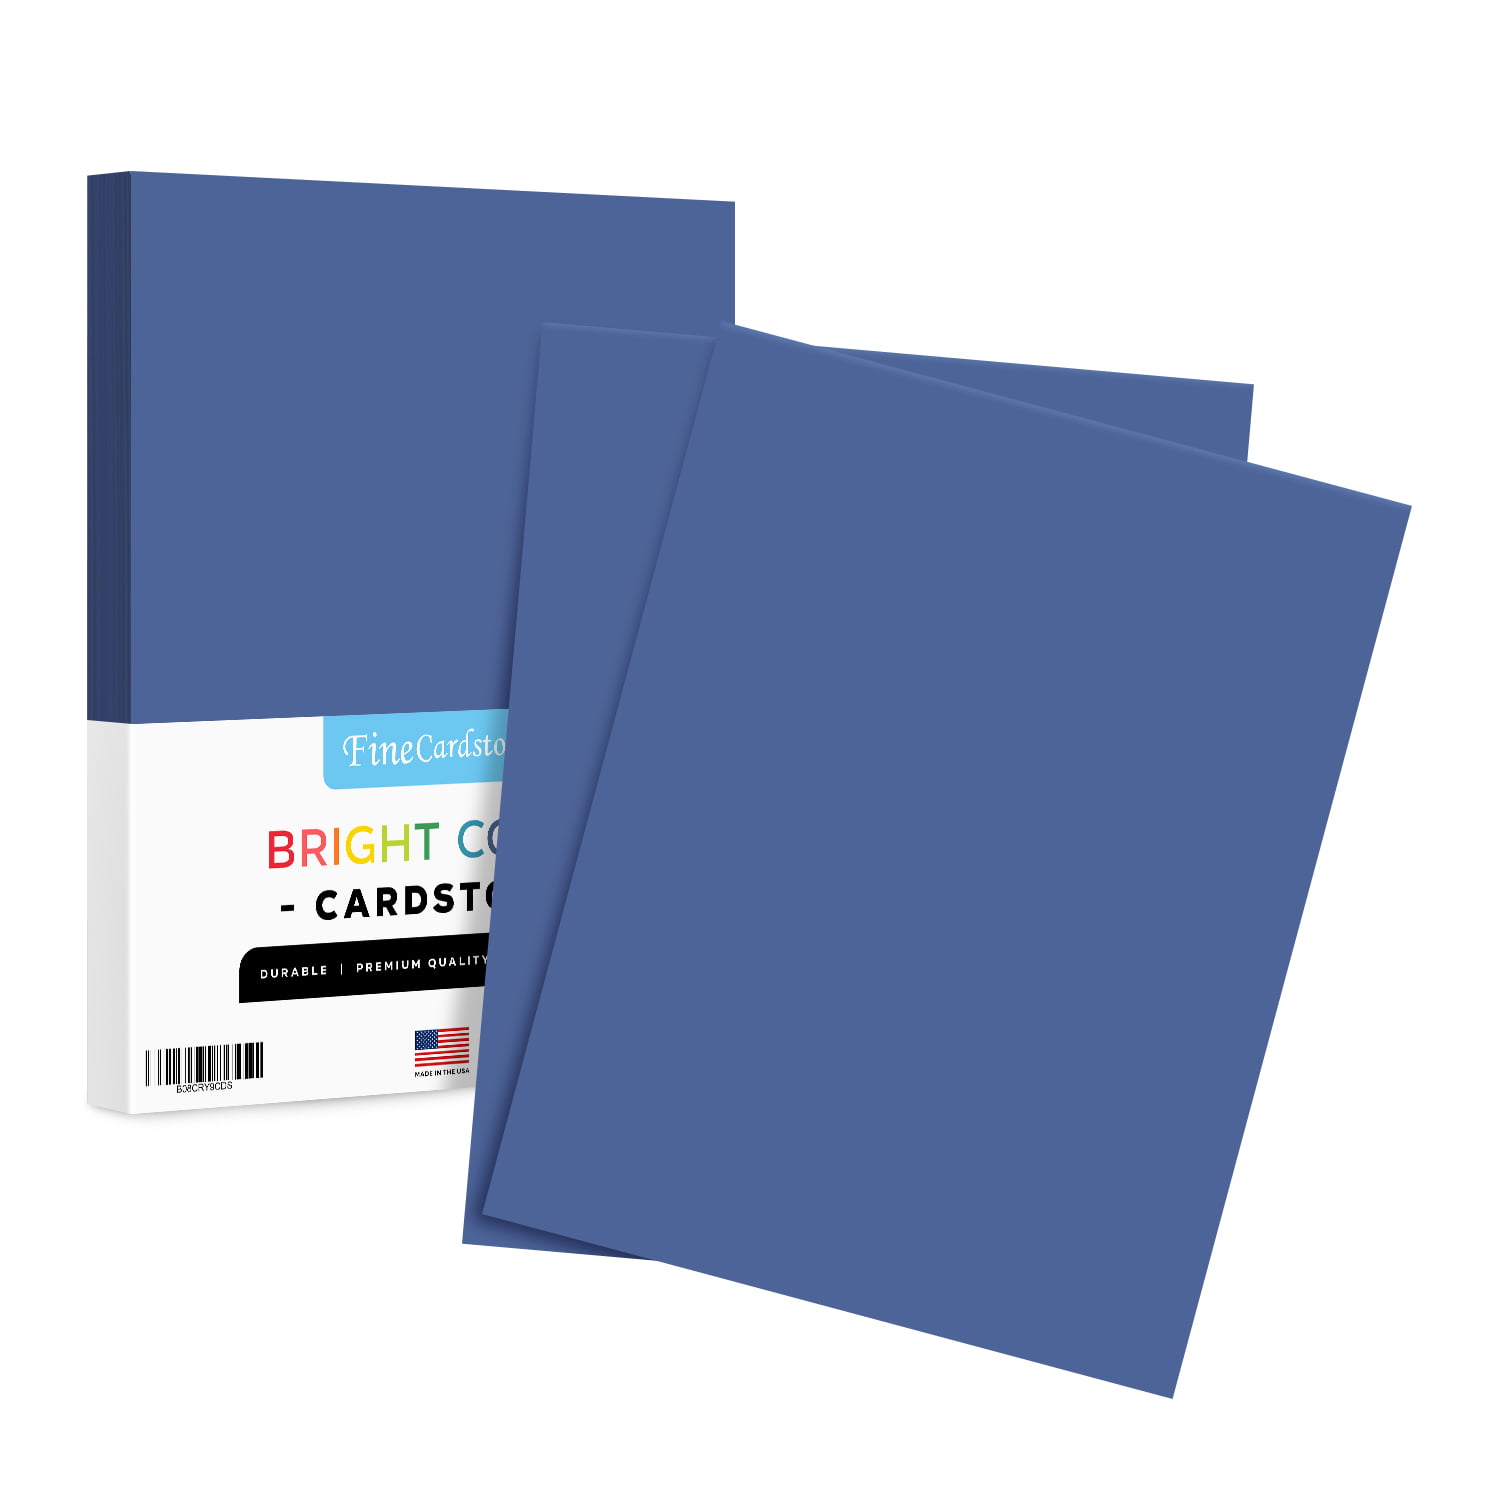 Neenah ASTROBRIGHTS® Papers: Bright& Vibrant Premium Colored Paper